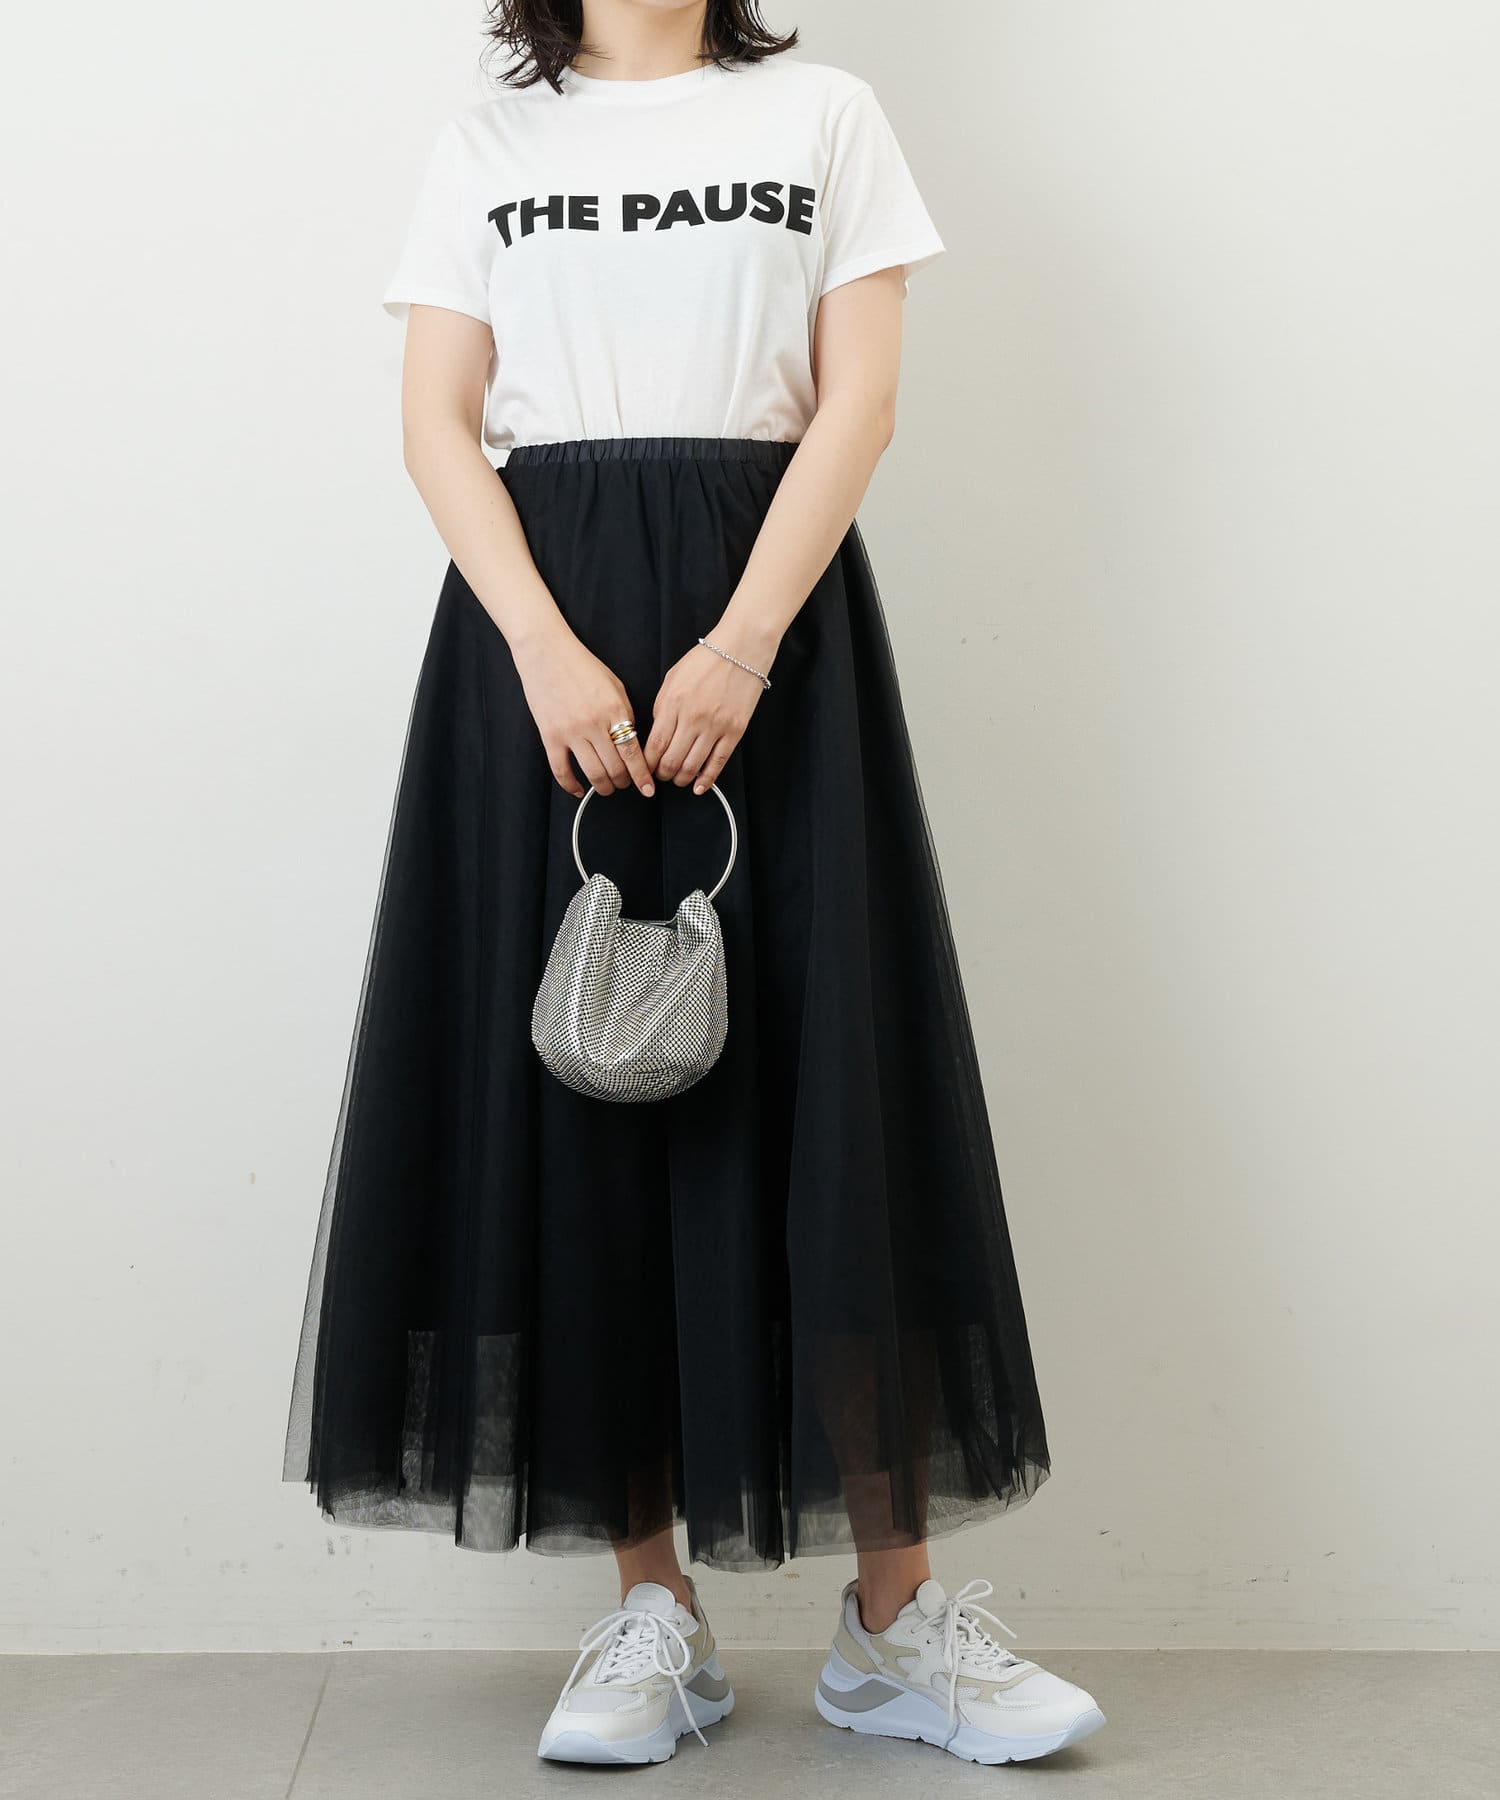 THE PAUSE】THE PAUSE Tシャツ | Whim Gazette(ウィム ガゼット 